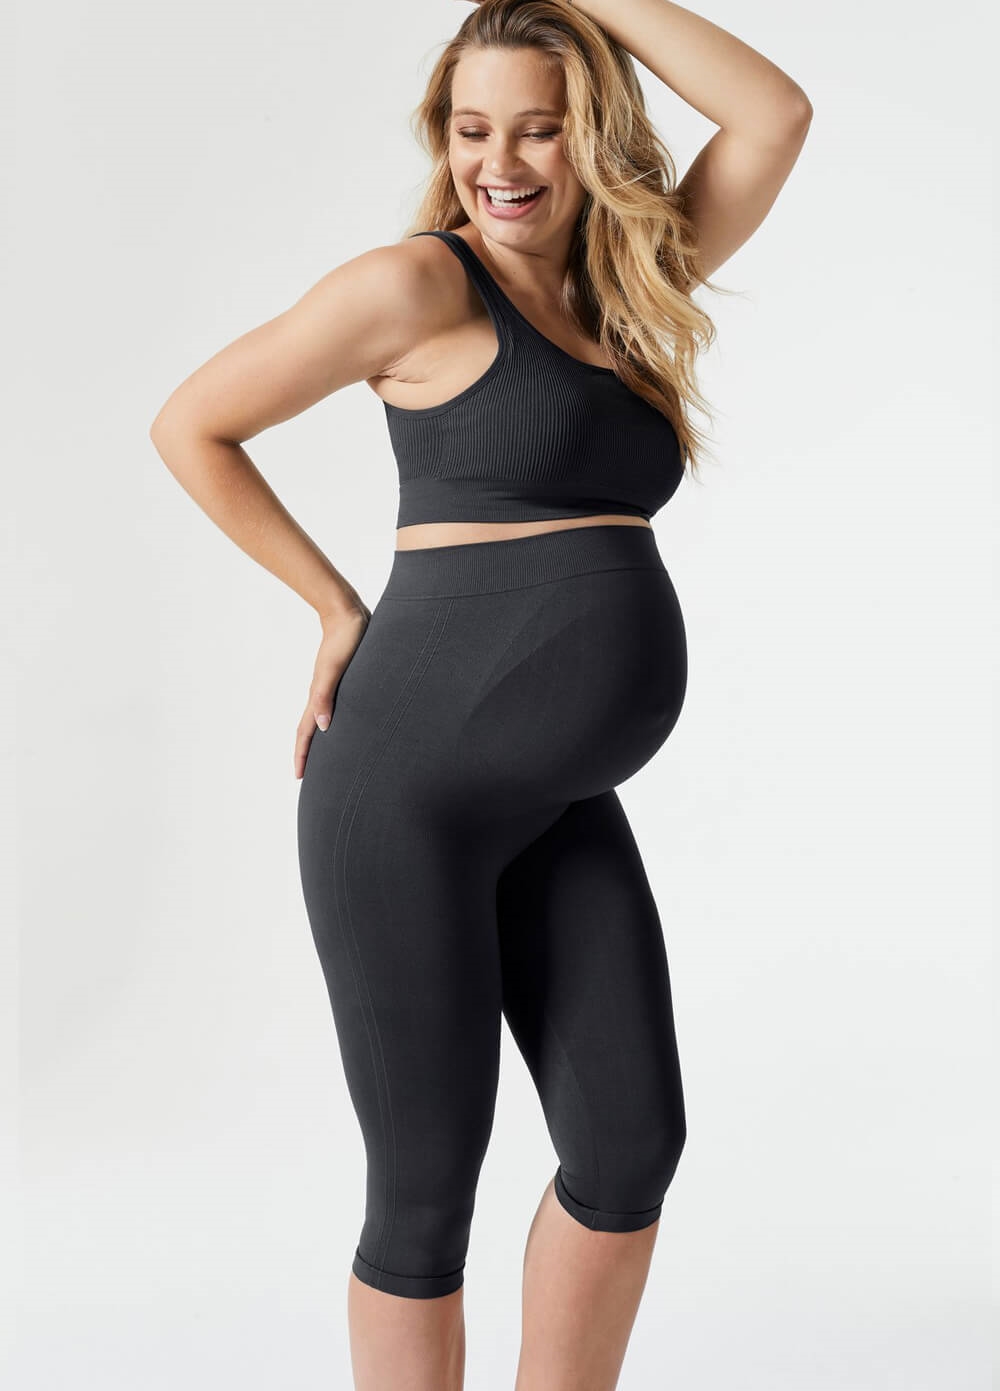 Blanqi Maternity Belly Support Crop Leggings - Black | Queen Bee